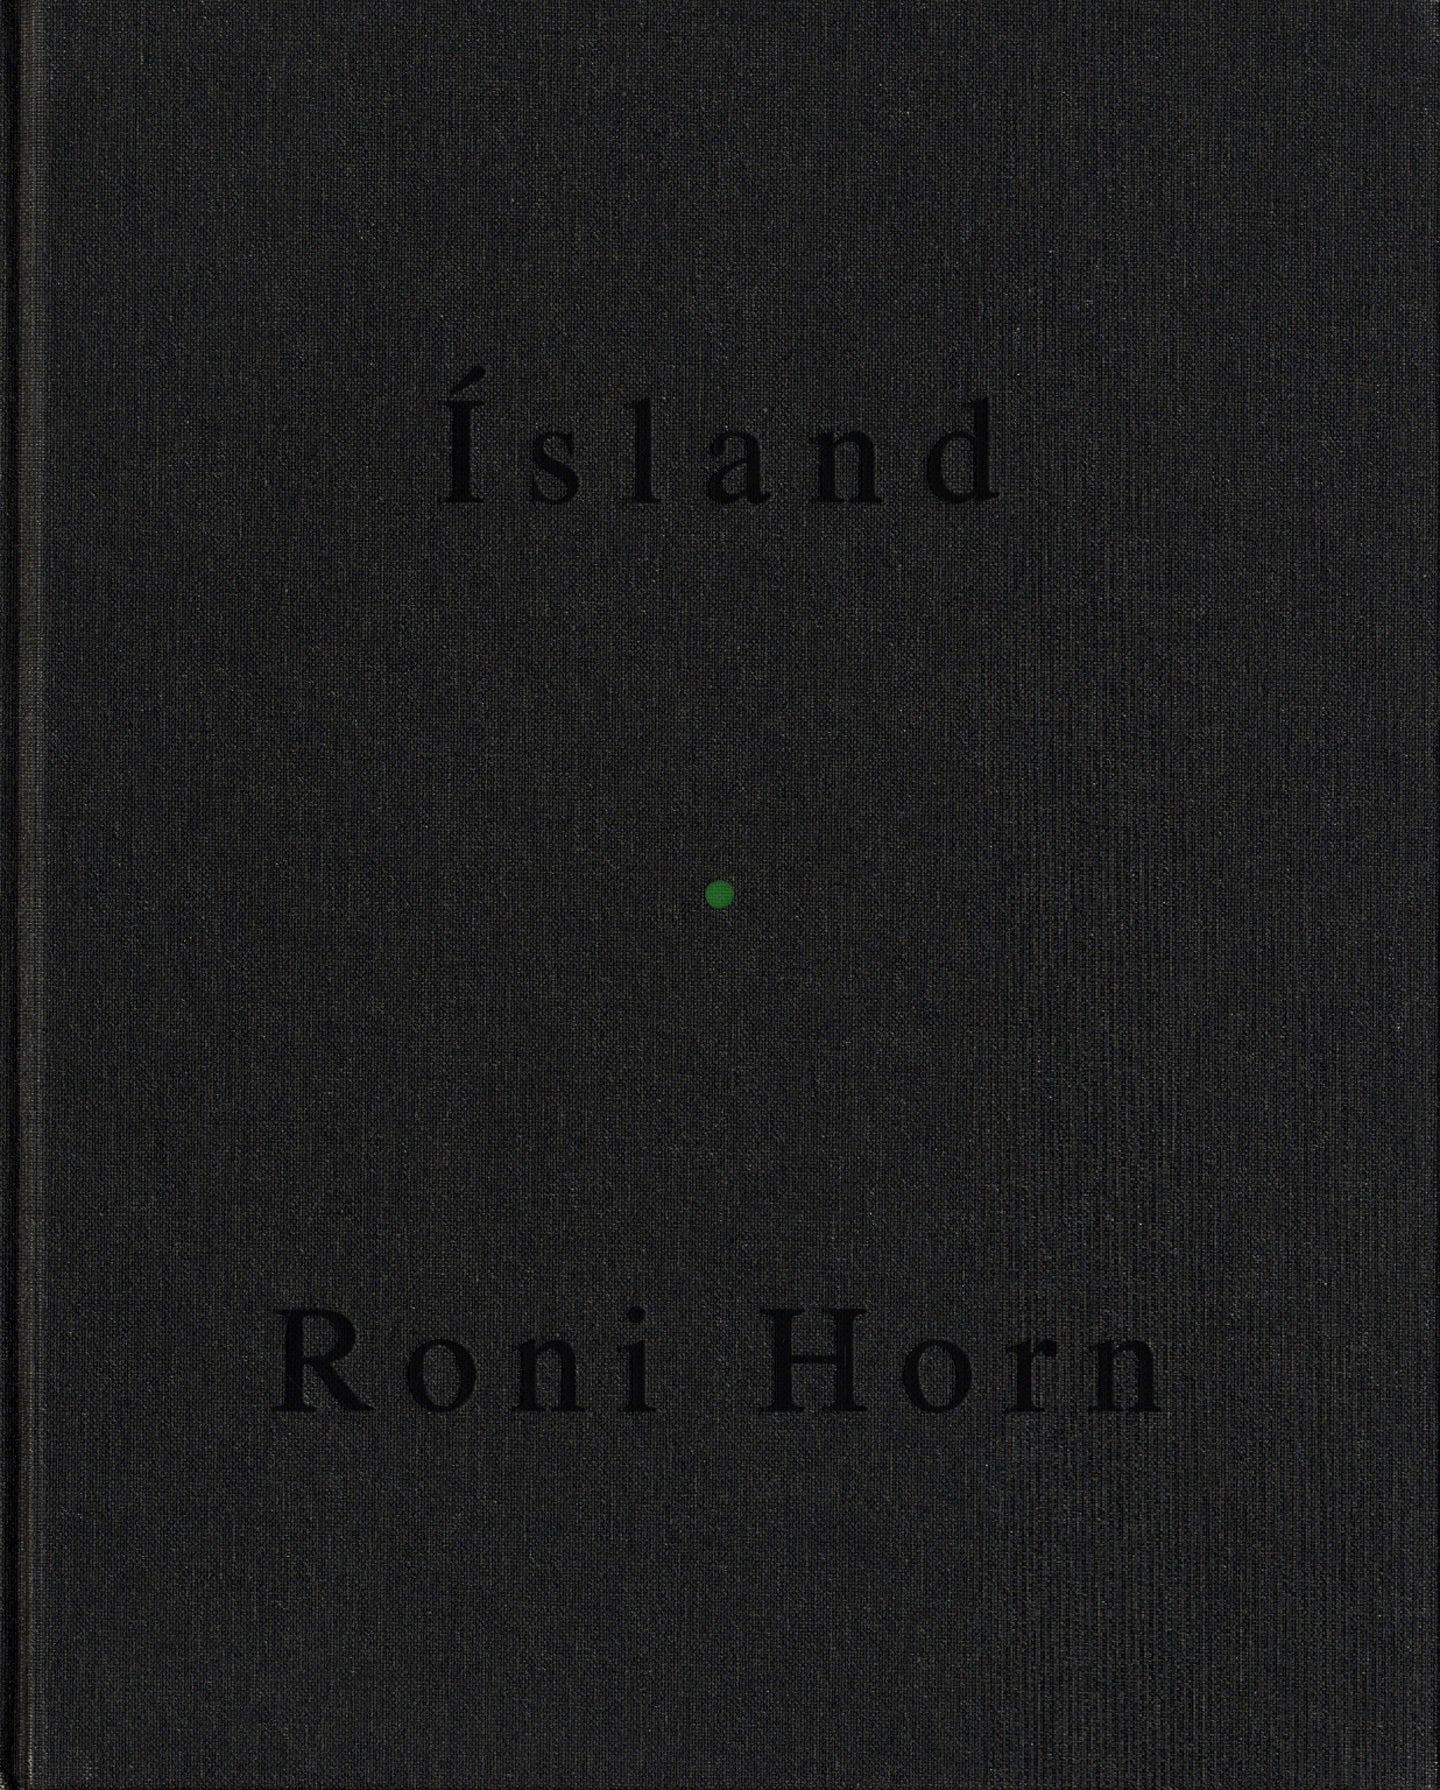 Roni Horn: Ísland (Iceland): To Place 1-10 (Complete Set, with Inner Geography supplement) [all titles SIGNED, all in AS NEW Condition]: 1) Bluff Life; 2) Folds; 3) Lava; 4) Pooling Waters (2 volumes); 5) Verne's Journey; 6) Haraldsdóttir; 7) Arctic Circles; 8) Becoming a Landscape (two volume boxed set); 9) Doubt Box (boxed set); 10) Haraldsdóttir, Part Two; 11) Inner Geography (catalogue supplement)